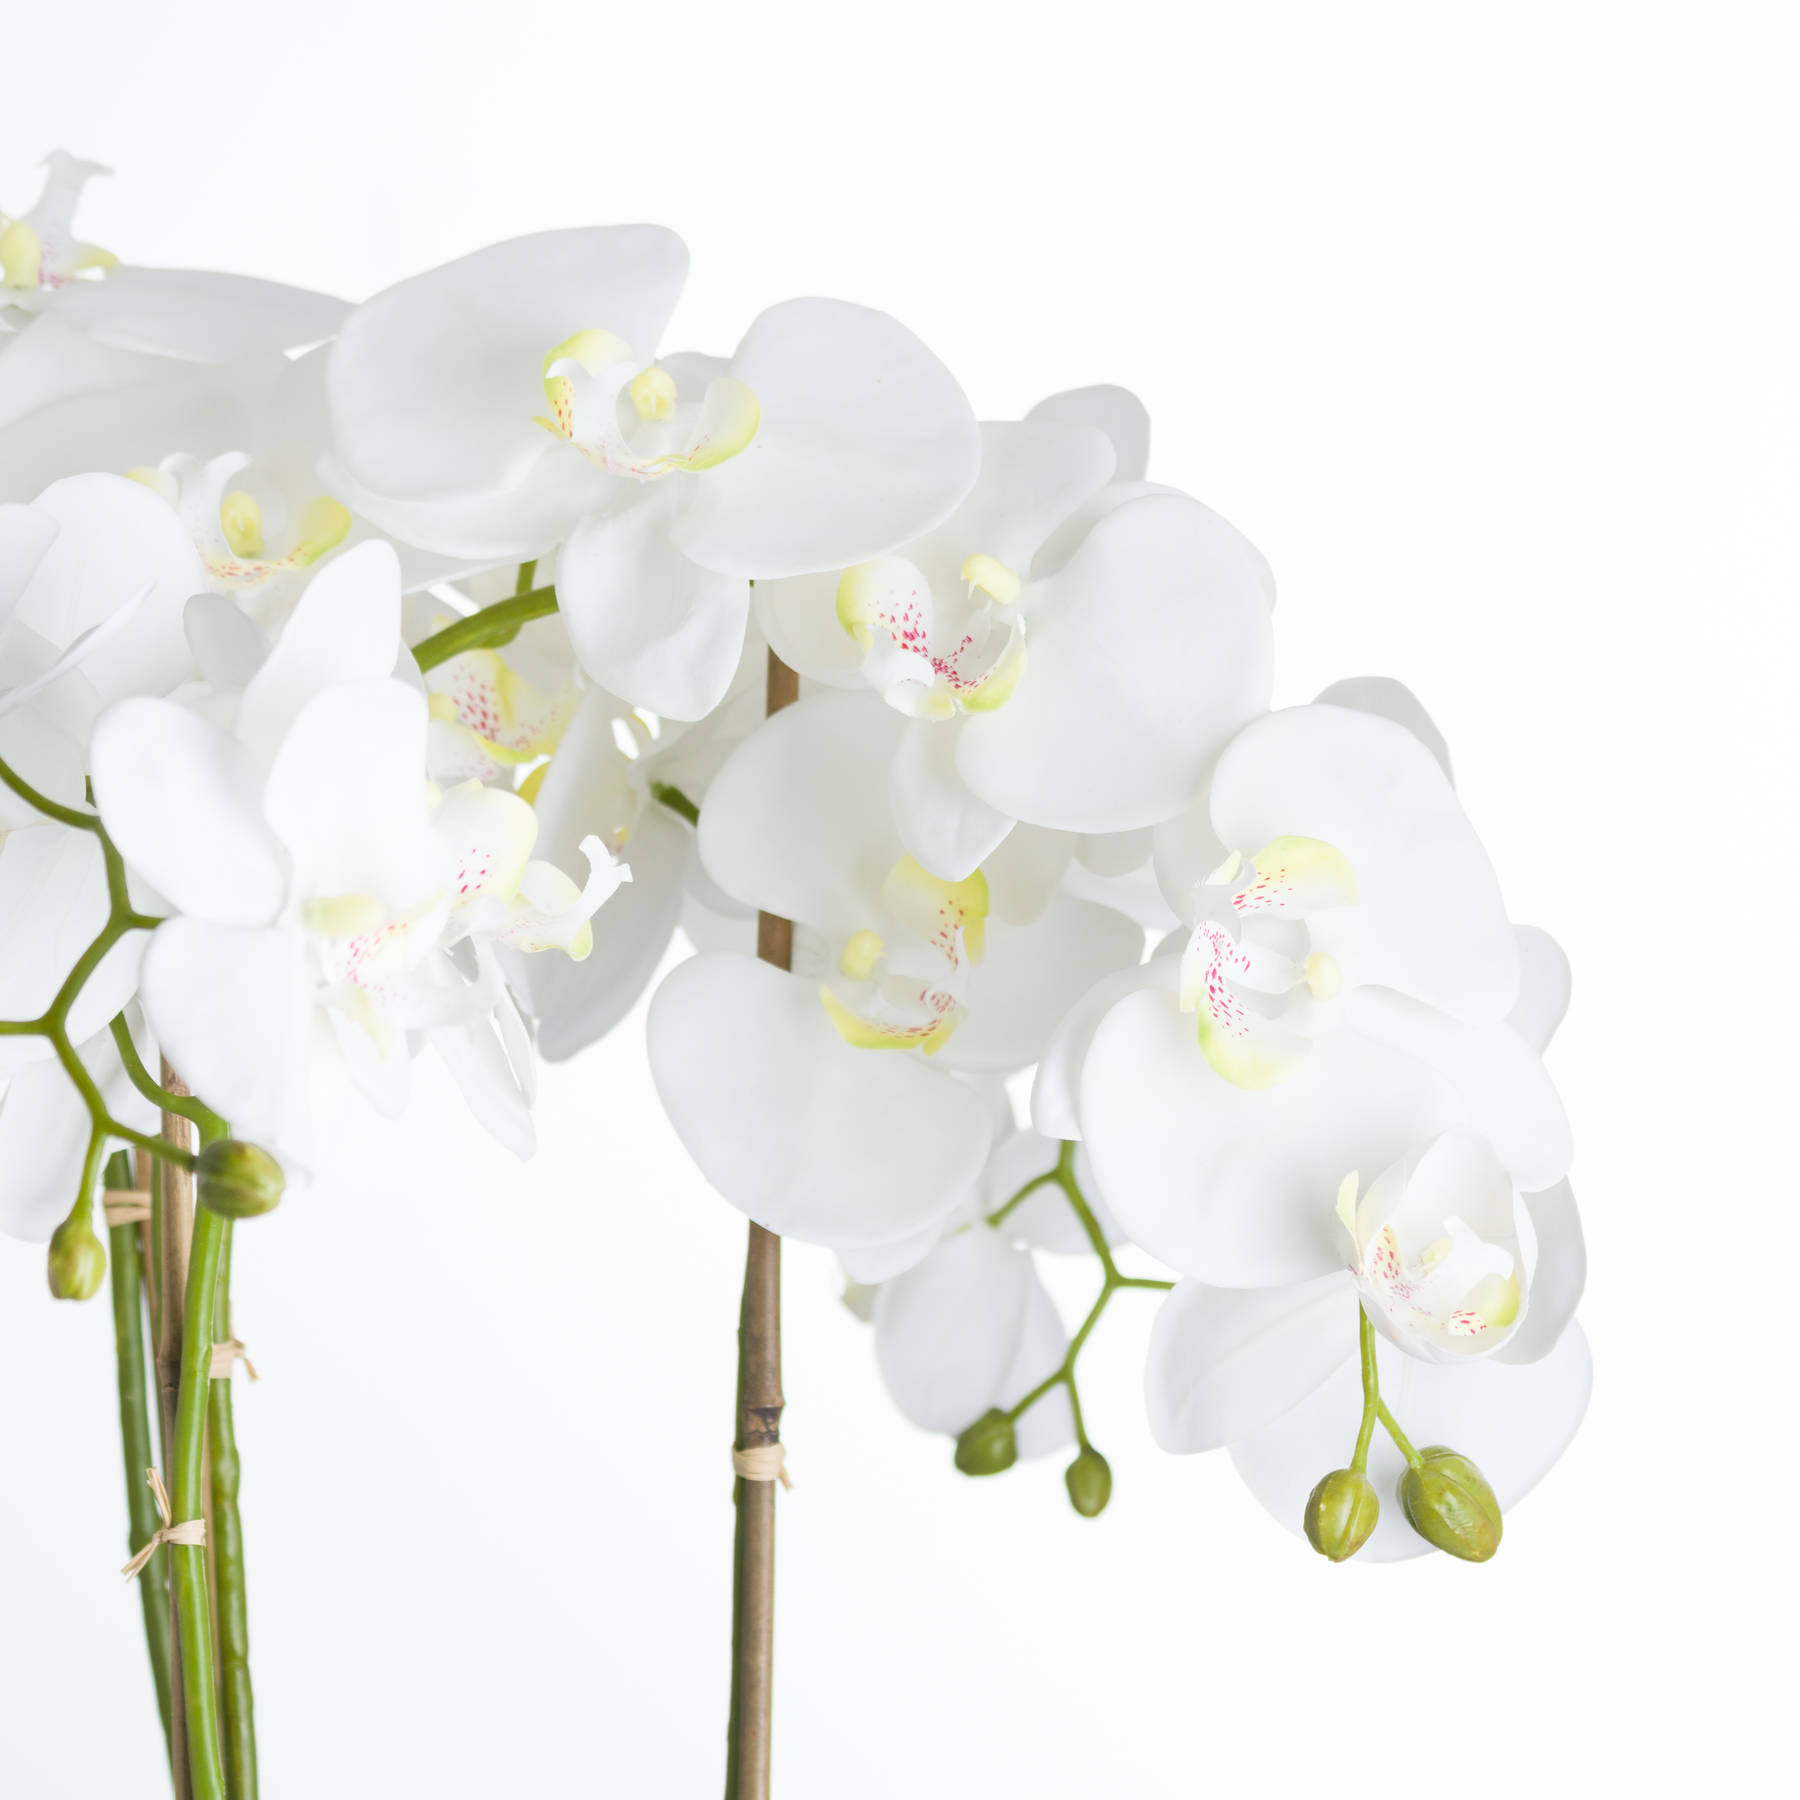 Large White Orchid In Stone Pot - Image 3